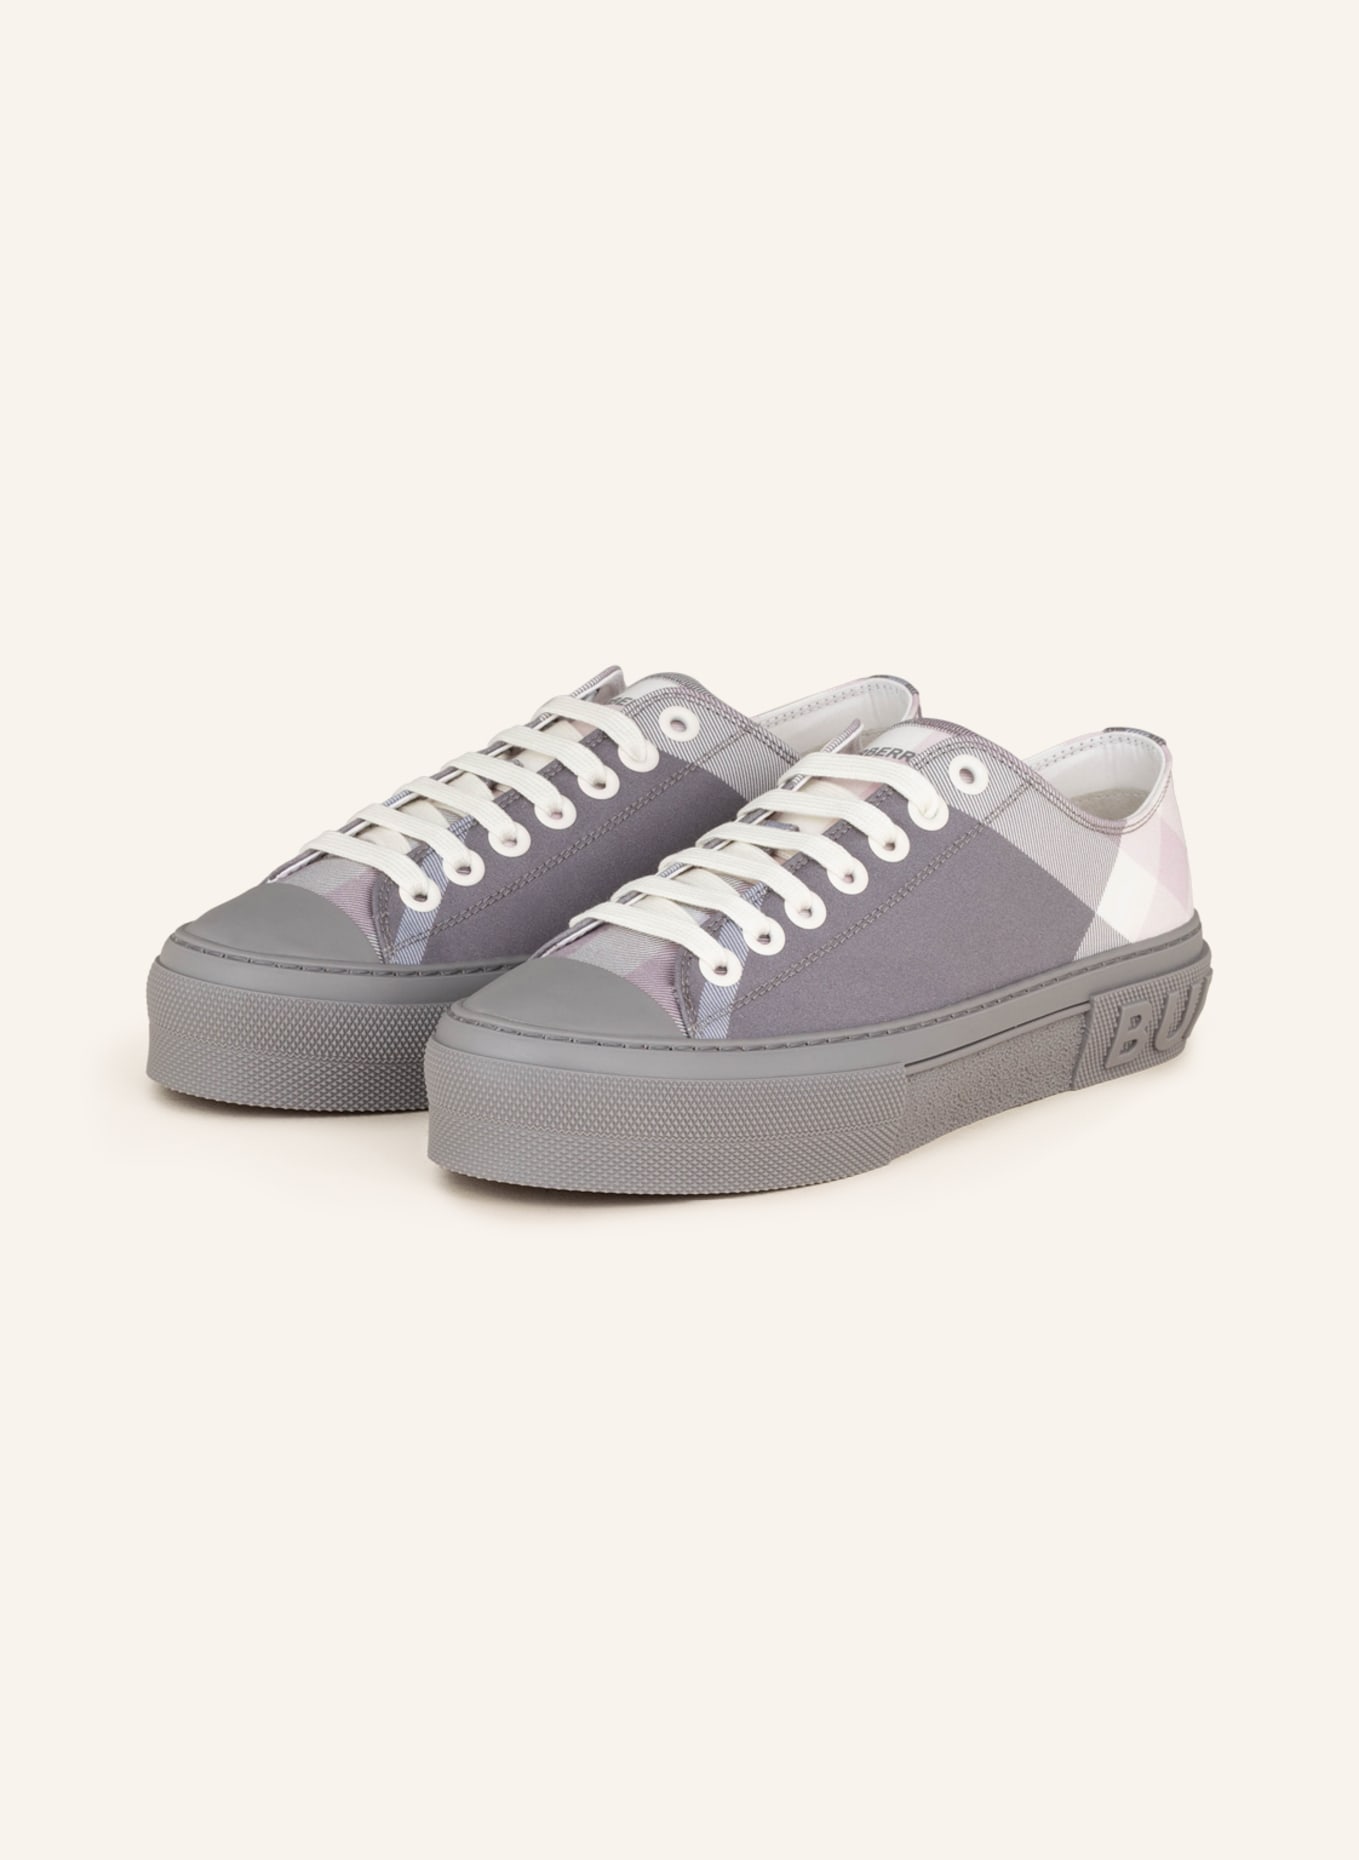 BURBERRY Sneakers JACK , Color: GRAY/ LIGHT GRAY/ LIGHT PINK (Image 1)